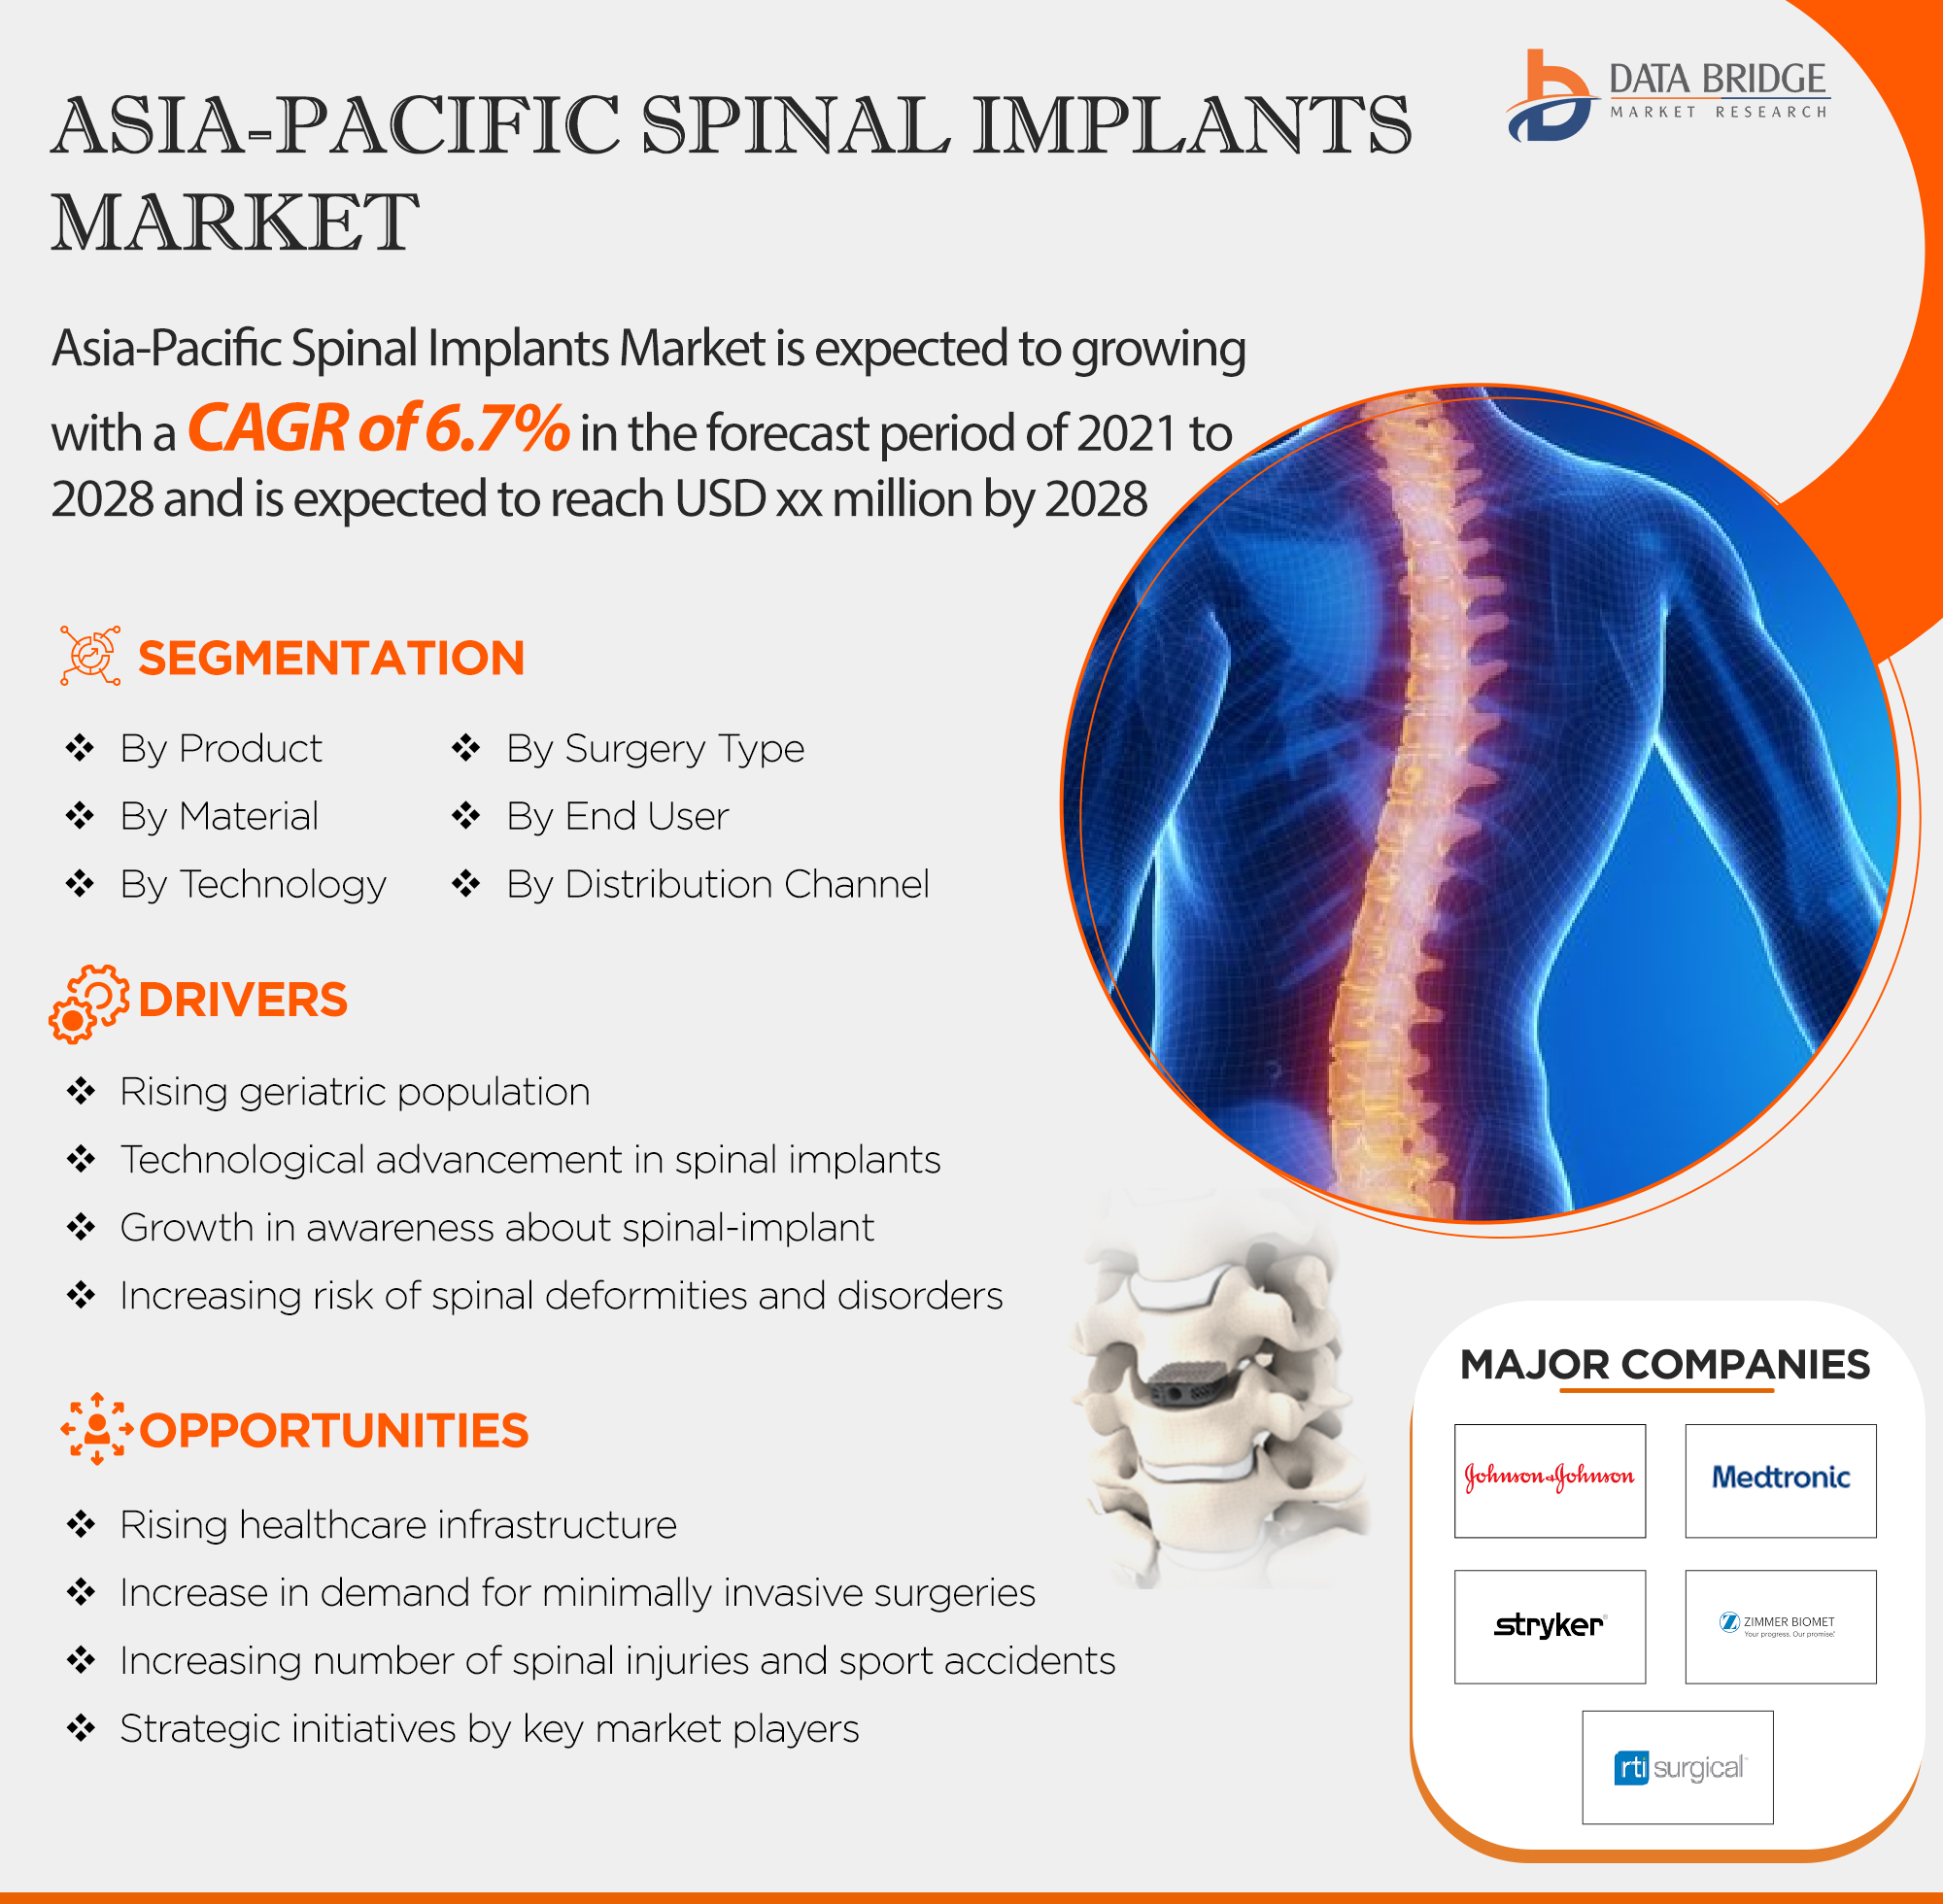 Asia-Pacific Spinal Implants Market